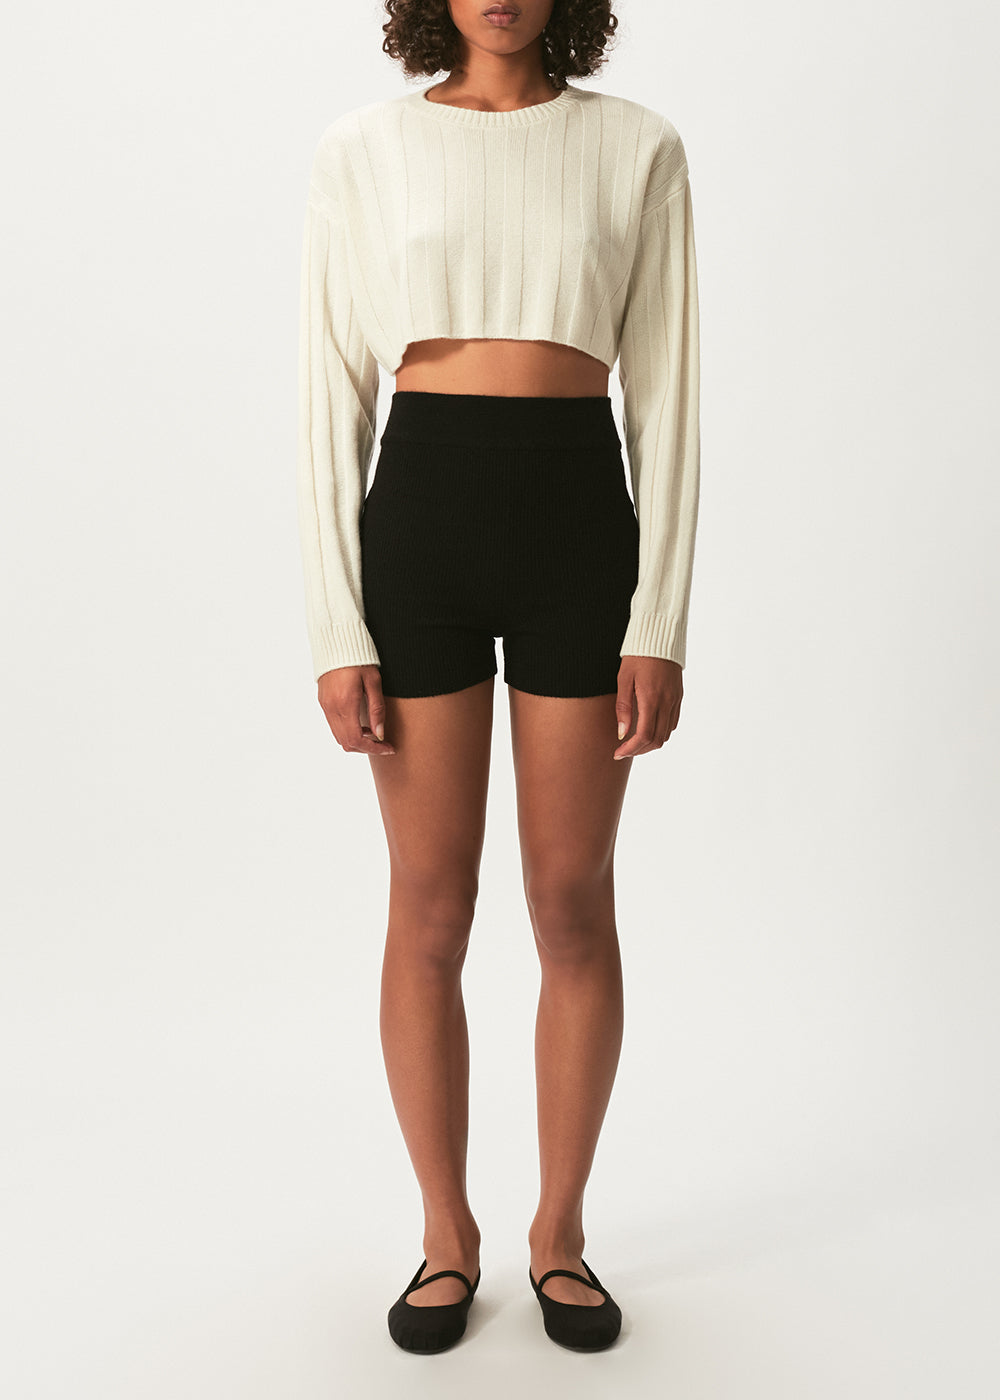 Remy Cropped Jumper - One Size / Ivory